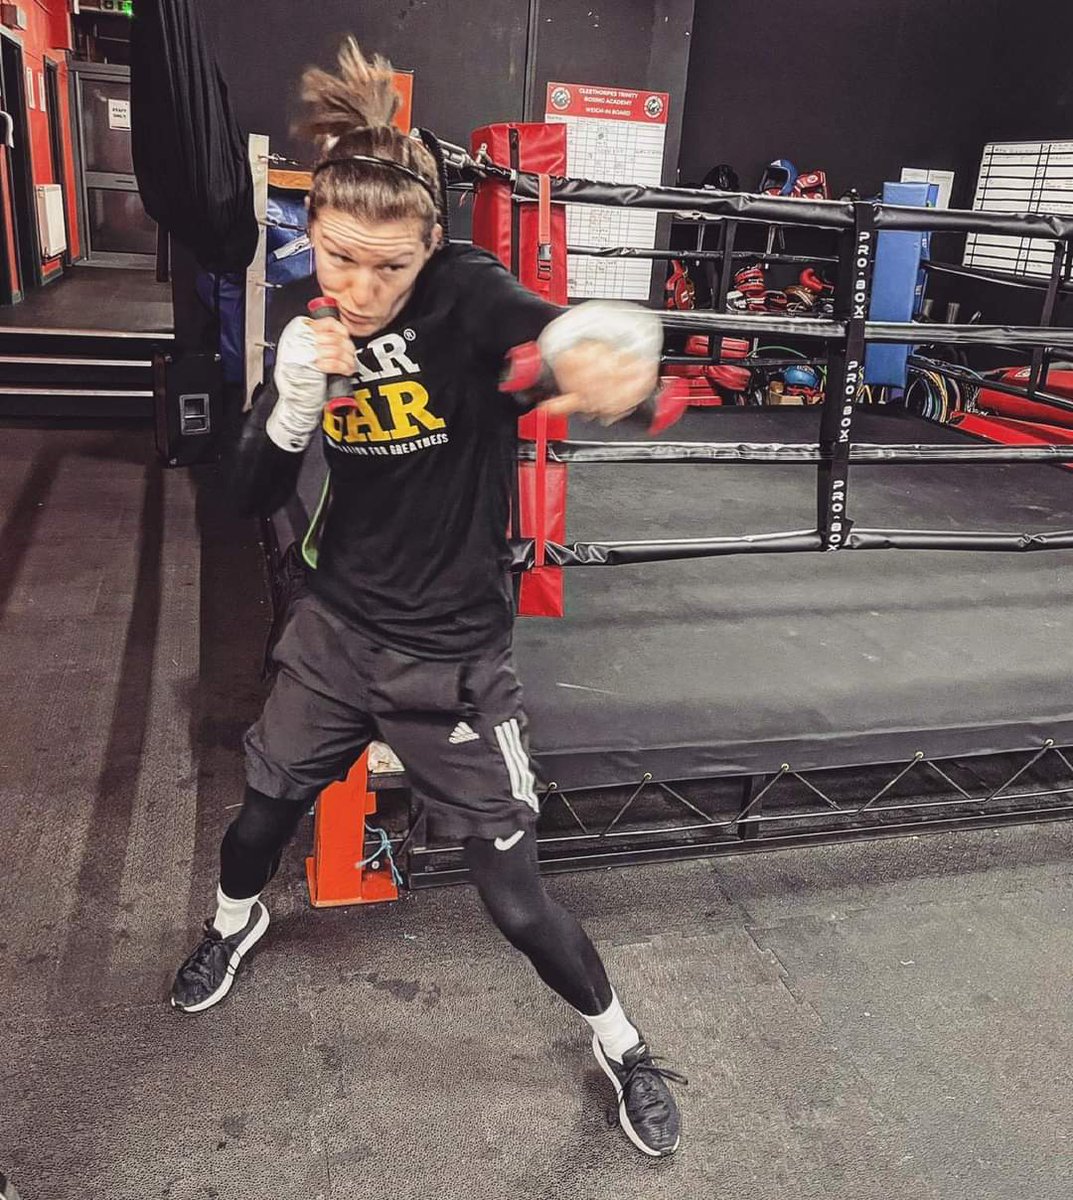 FIGHT WEEK 🔥

Kirsty Hill makes her professional debut this Saturday on the @CarlGreavesPro show 🥊

Looking to hit the ground running and get moving with Kirsty as she transitions from amateur to the pro game.

#TeamTrin 🔴
#AllOfTheLights 🔥